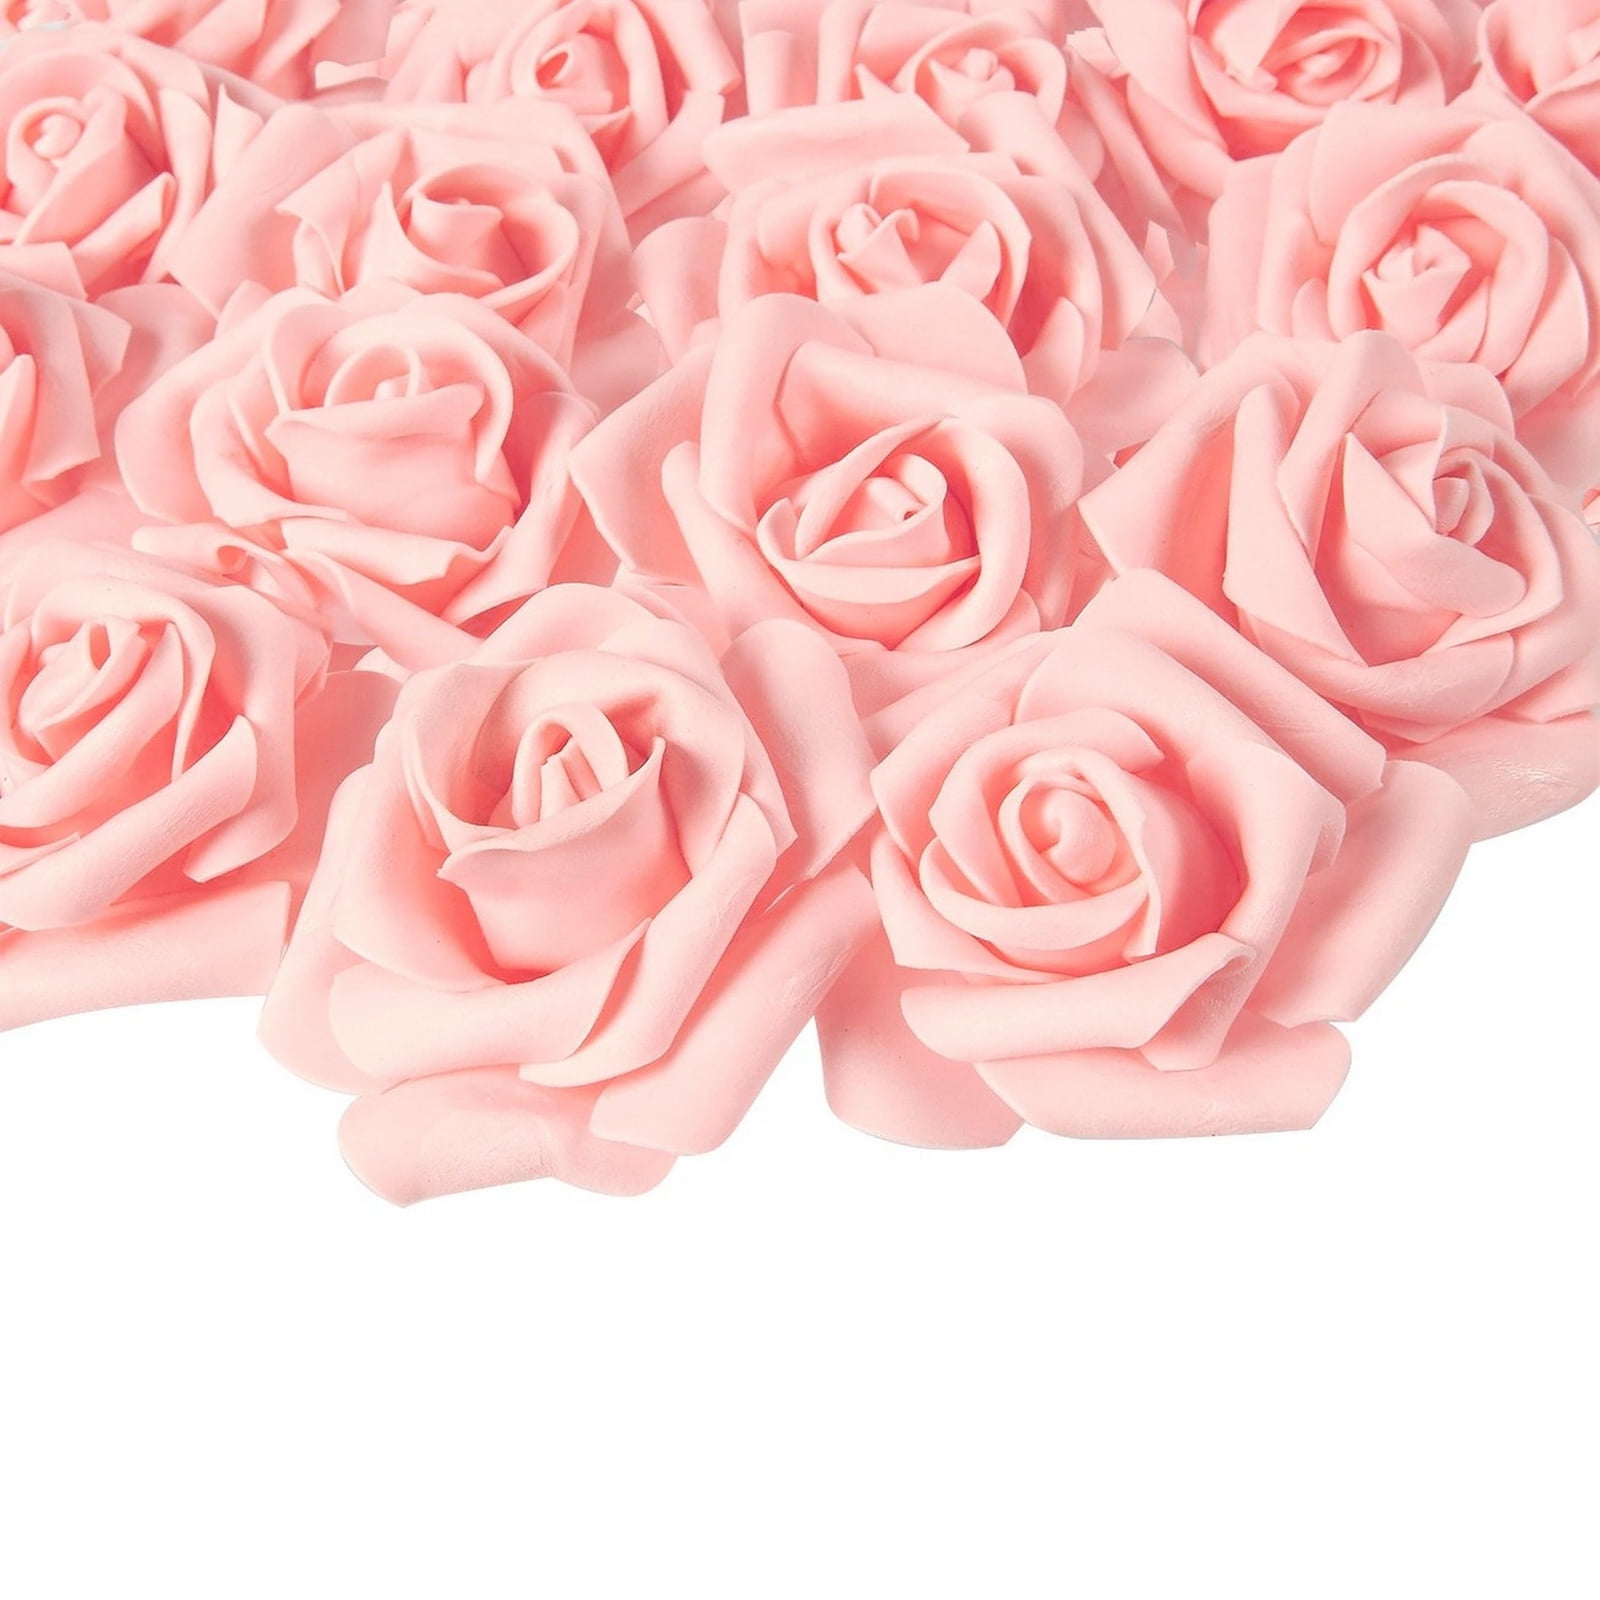 100 Rose Petals for any occasion! A Bed of Roses 